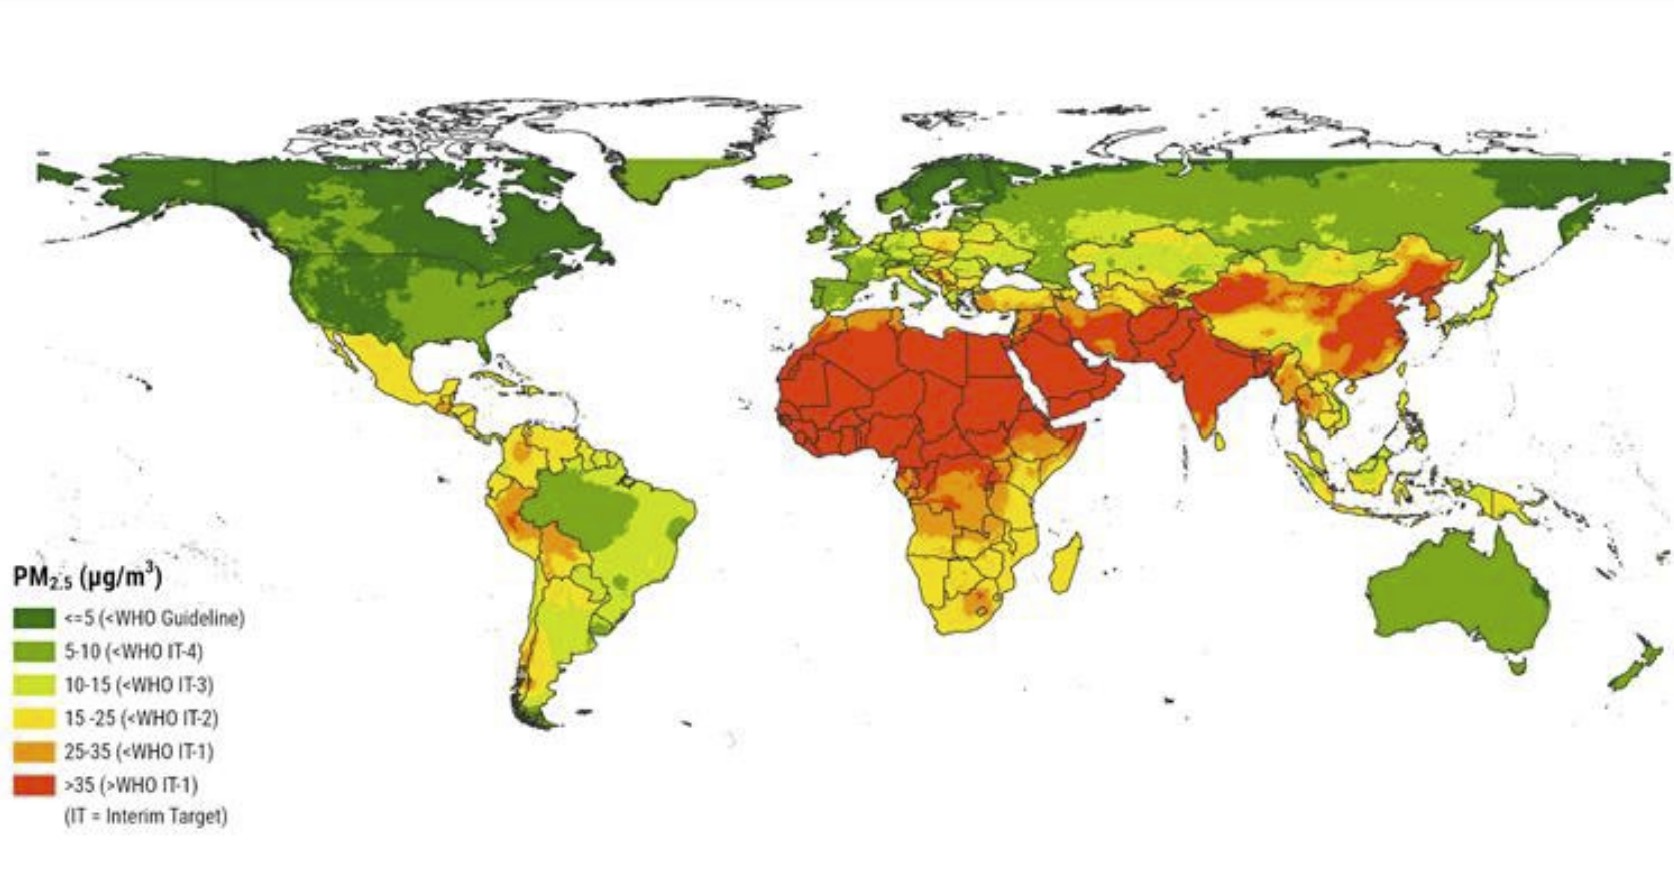 world map showing highest particulate matter in North Africa, Middle East, and South Asia